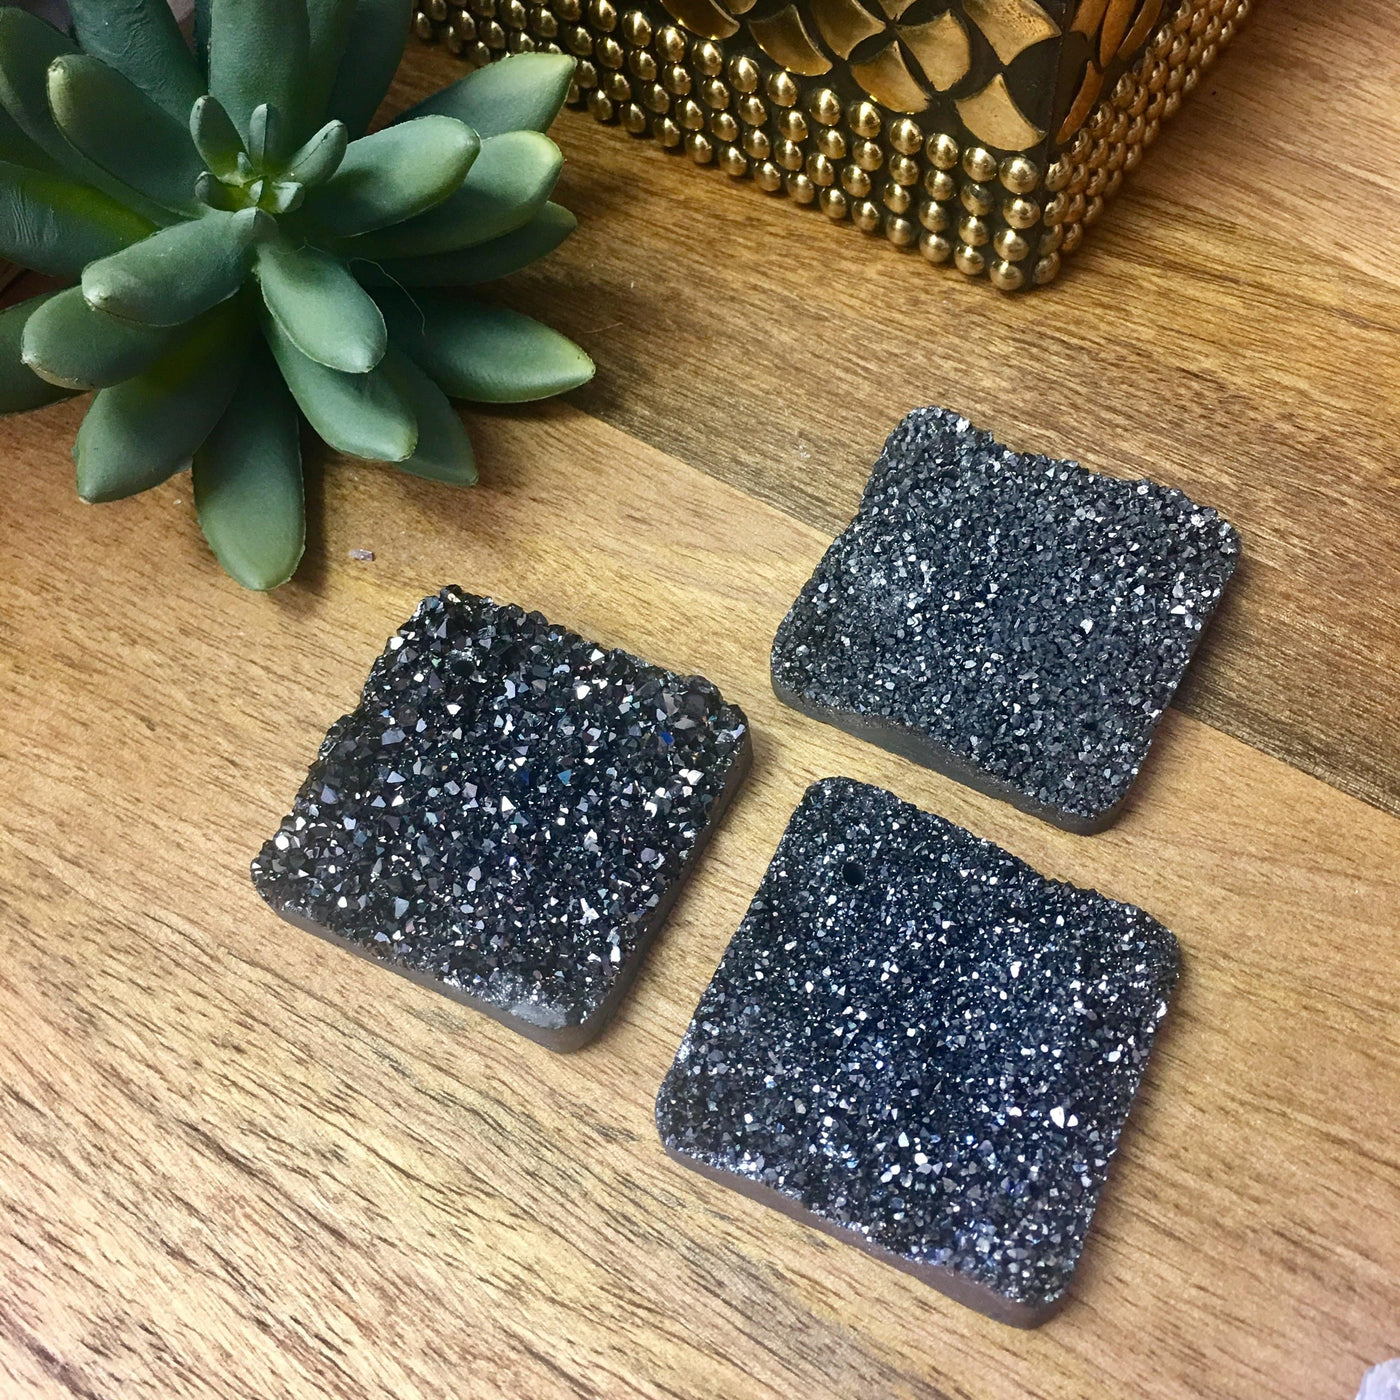 3 druzy diamond shaped beads on wooden table with plant in the background